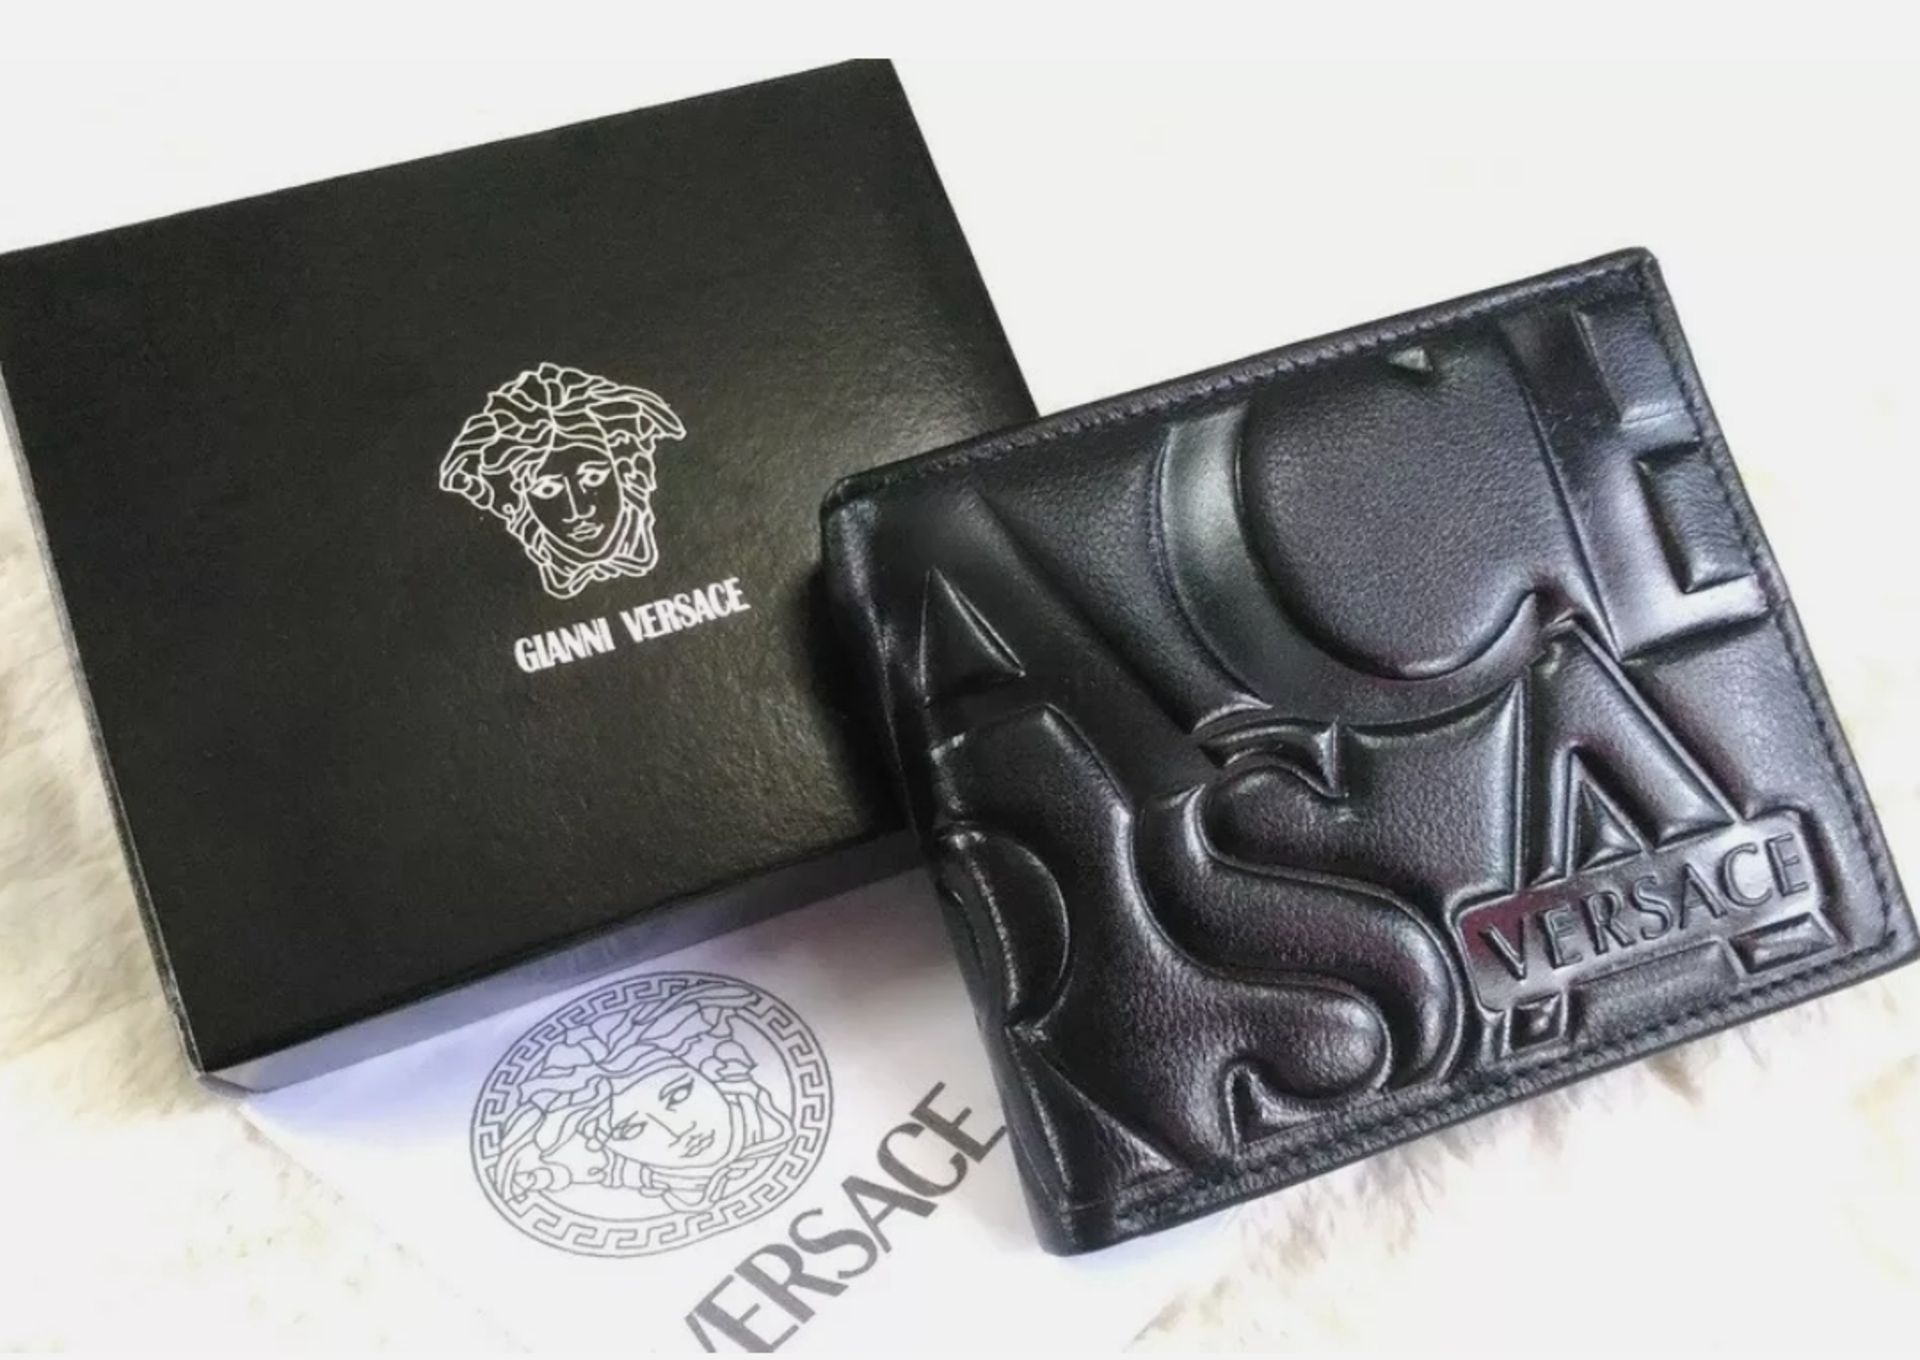 versace men's leather wallet - new with box - Image 2 of 7